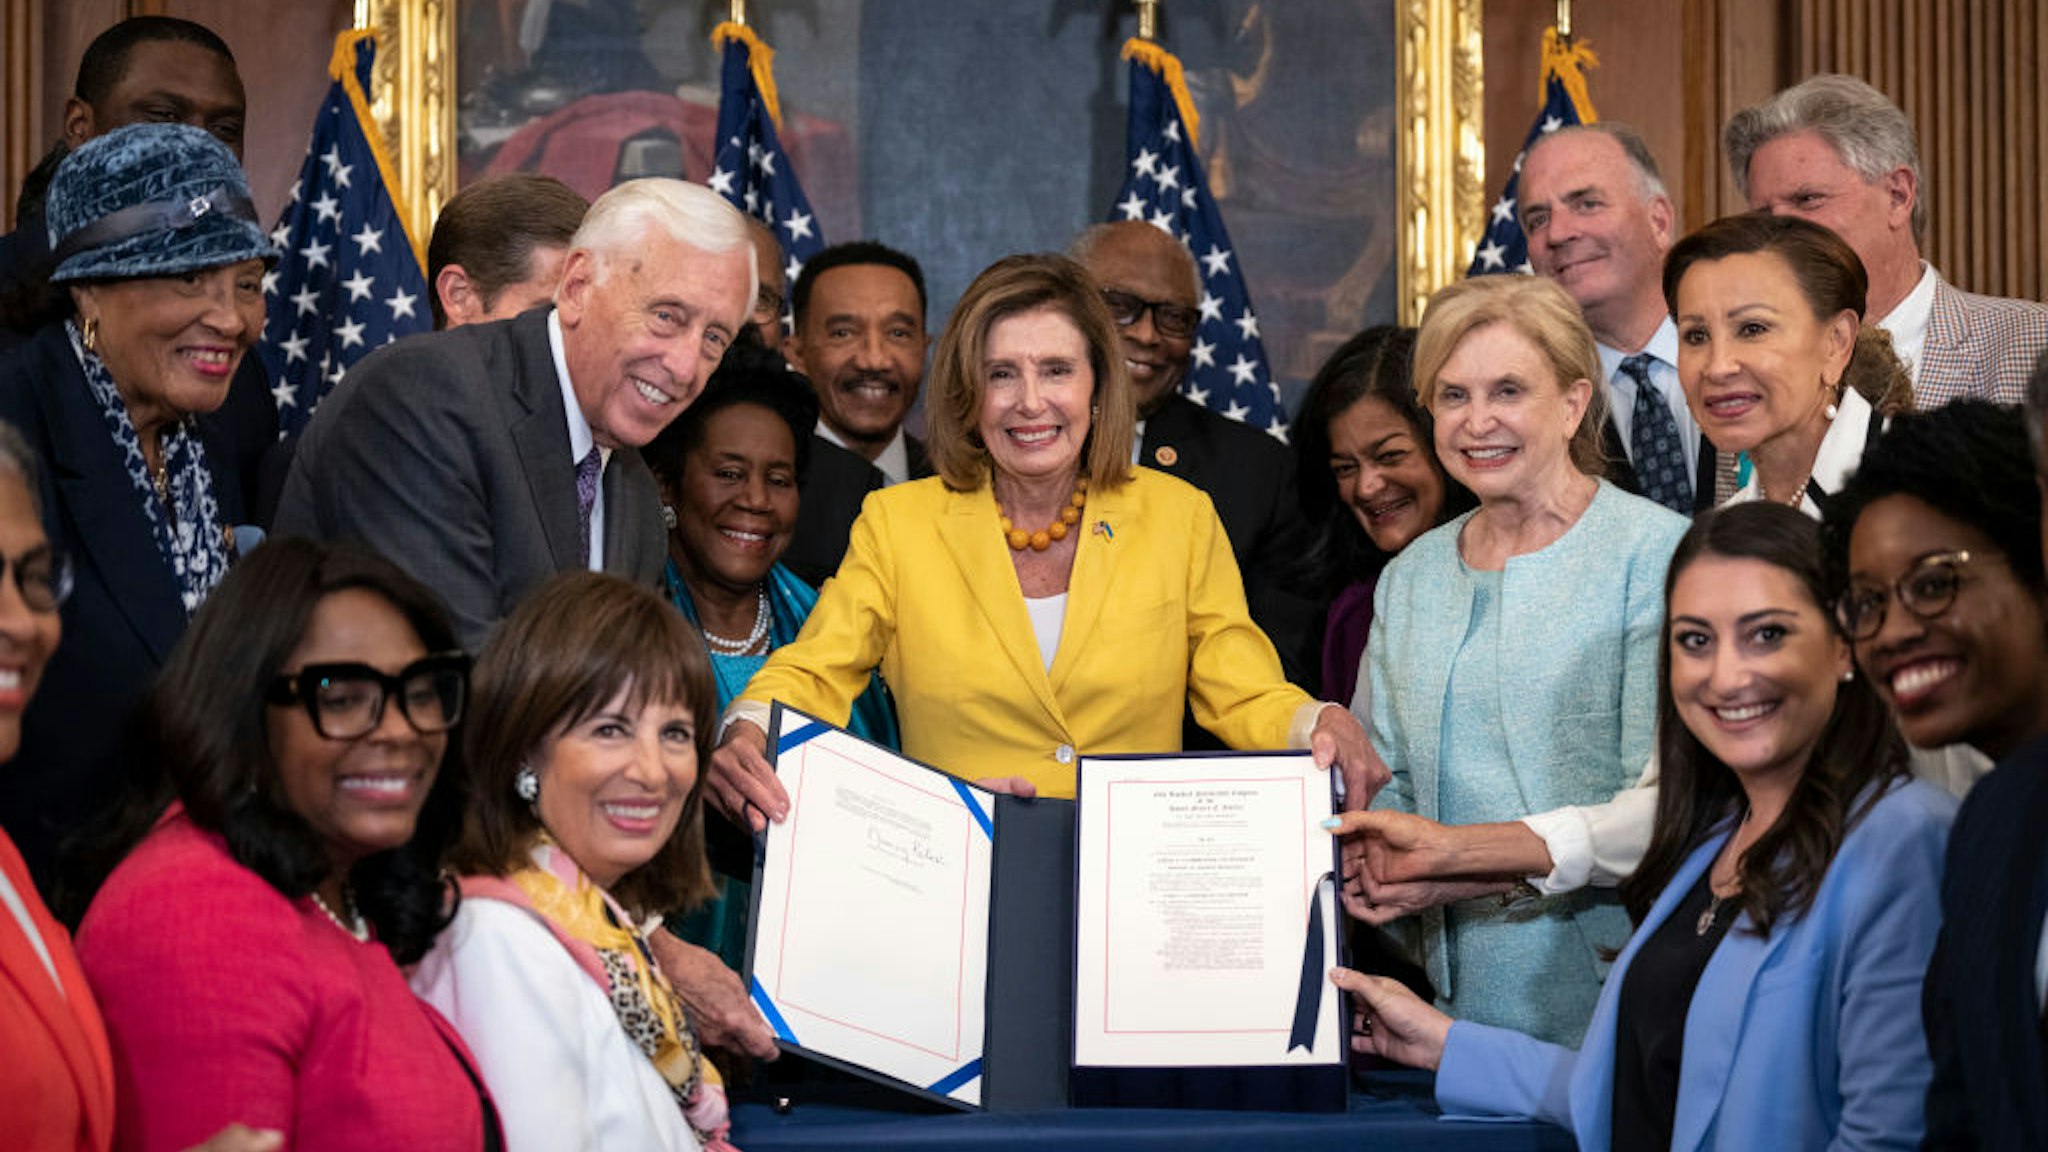 WASHINGTON, DC - AUGUST 12: House Democrats pose for photos after Speaker of the House Nancy Pelosi (D-CA) signed the Inflation Reduction Act during a bill enrollment ceremony after the House passed the legislation at the U.S. Capitol August 12, 2022 in Washington, DC. The $737 billion legislation will focus on slowing climate change, lower health care costs and creating clean energy jobs by enacting a 15% corporate minimum tax, a 1% fee on stock buybacks and enhancing IRS enforcement. (Photo by Drew Angerer/Getty Images)